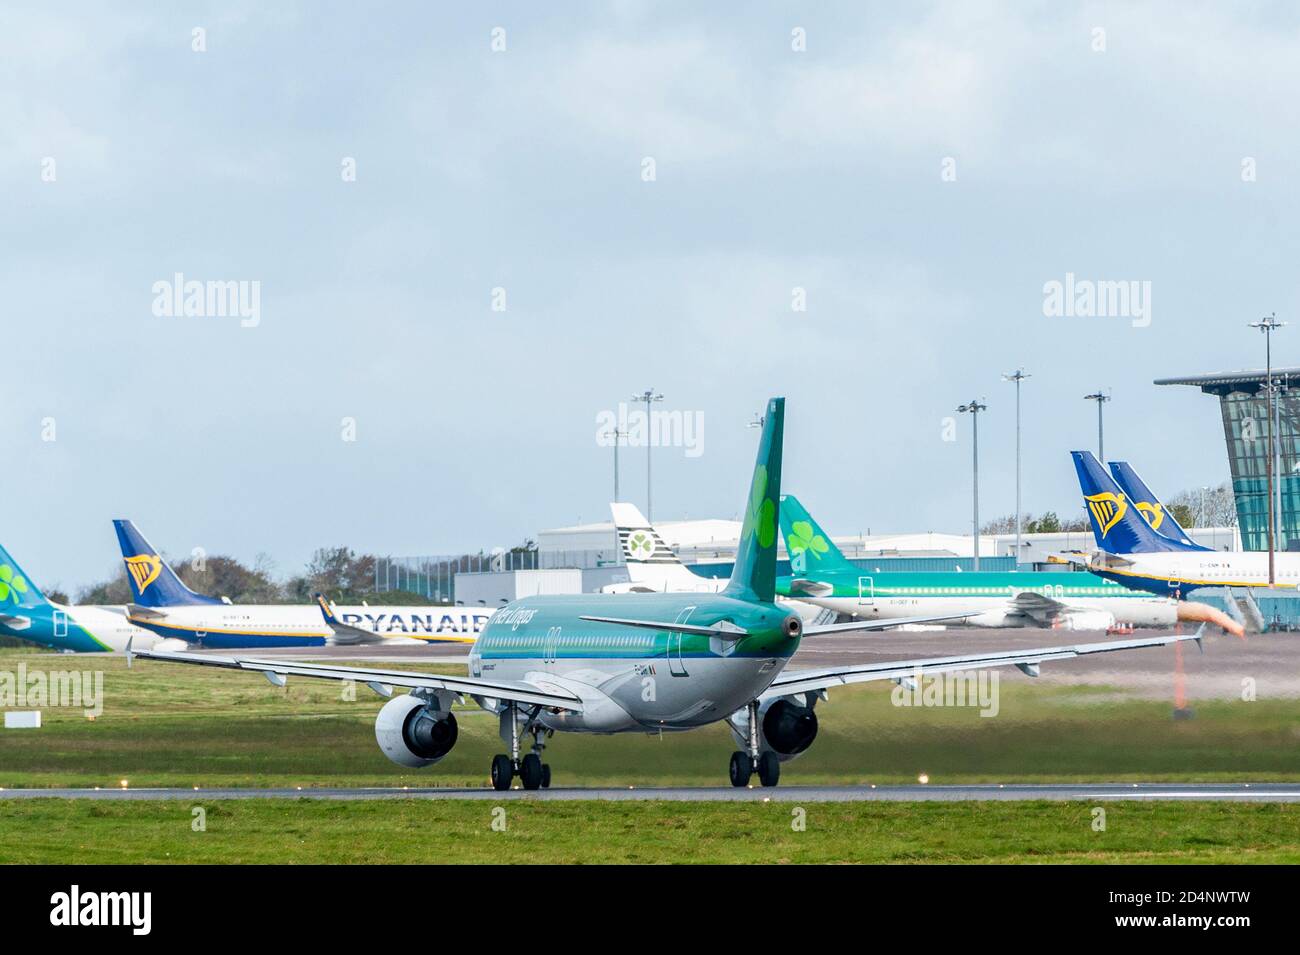 Cork, Ireland. 10th Oct, 2020. Aer Lingus and Ryanair aircraft sit redundant on the tarmac at Cork Airport as Ireland's Level 3 restrictions hit international travel hard. From Monday 12th Oct, the government has said there will be no foreign countries on the Green Travel List, meaning anyone flying into Ireland will have to self-isolate for 14 days. The next review will be on Thursday 15th October. Aer Lingus flight EI172 takes off for London Heathrow. Credit: AG News/Alamy Live News Stock Photo